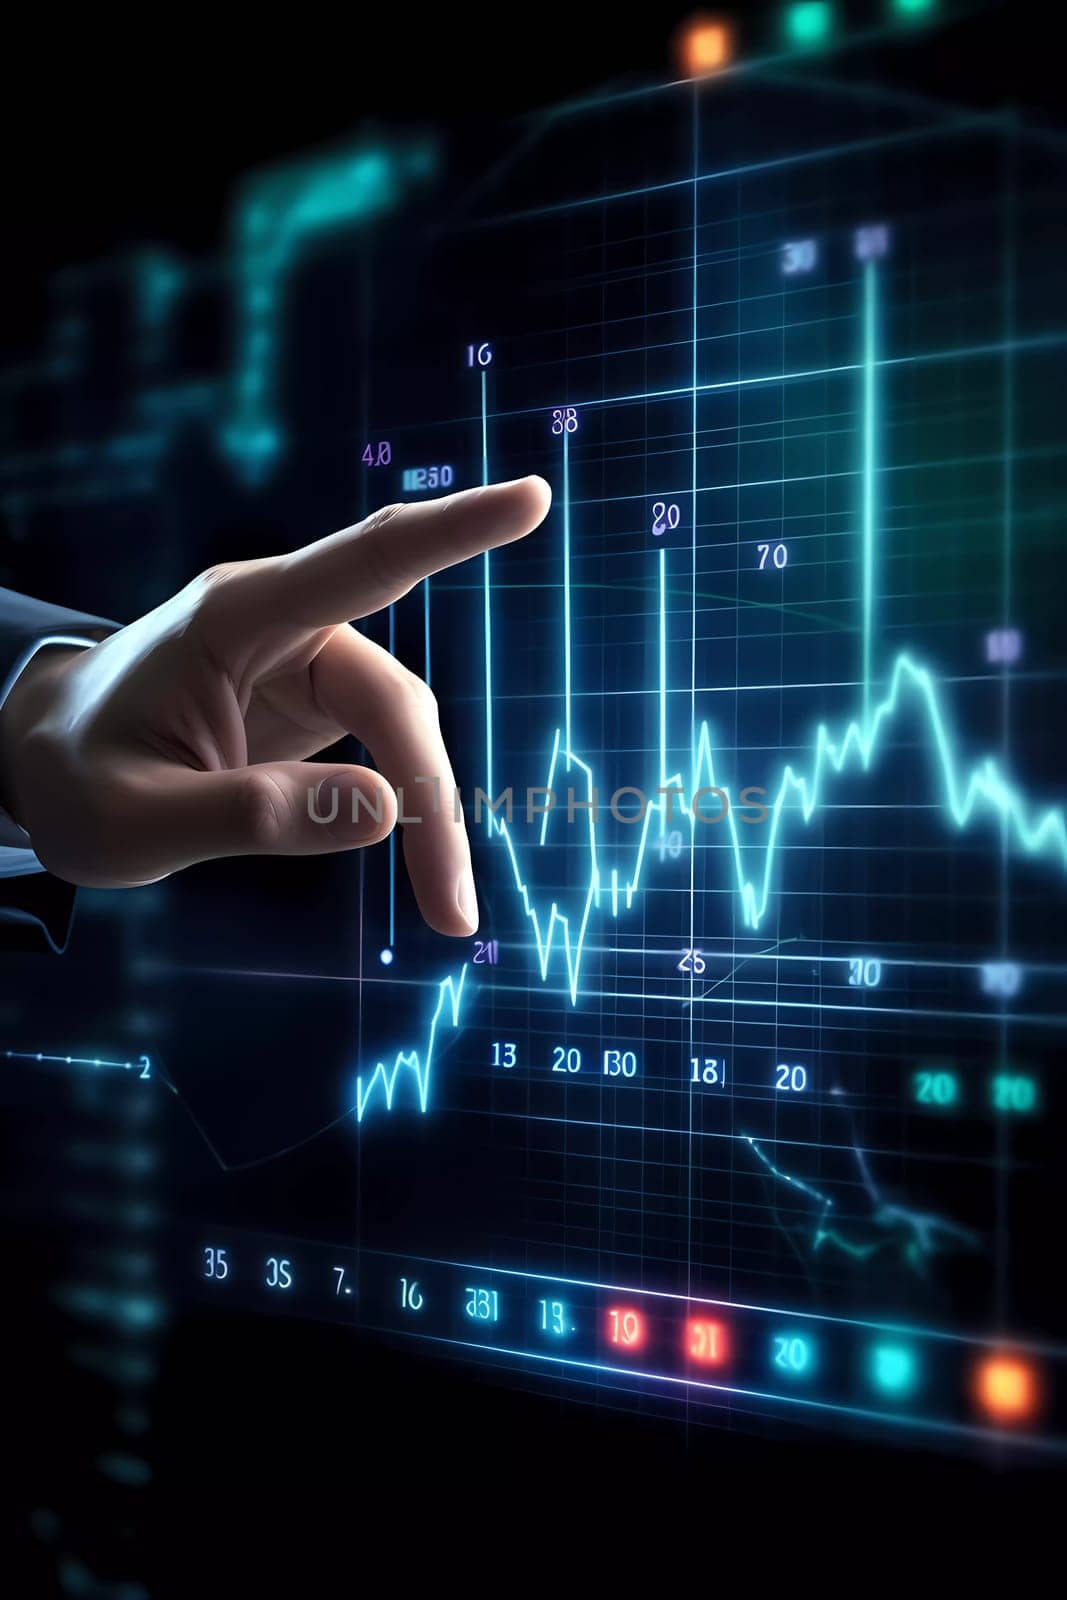 Humans hand shows on hi-tech cyber digital screen with financial graphs. Business analytics concept image